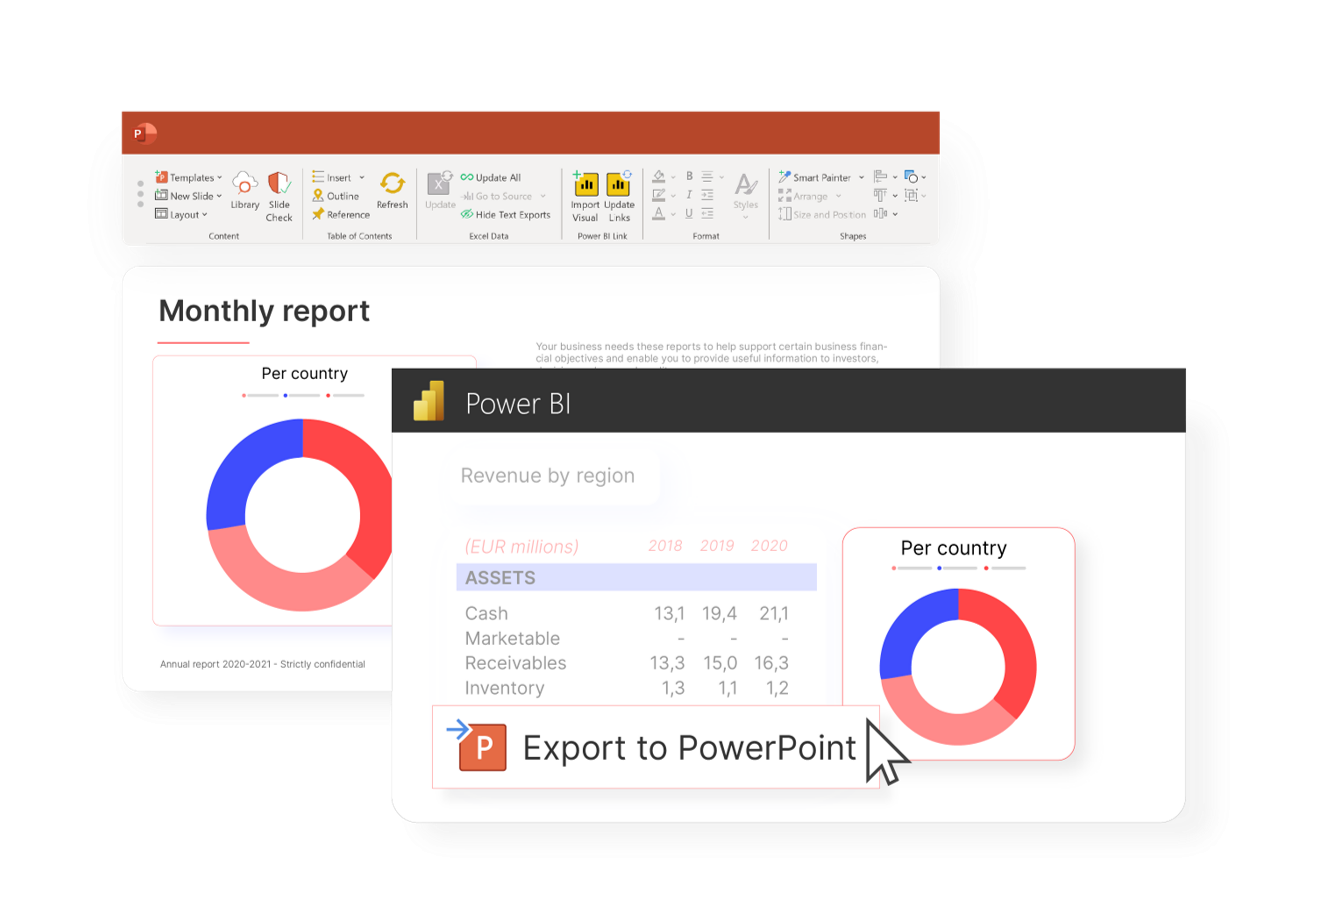 Leverage your Power BI reports to tell more inspiring stories with your data in PowerPoint and Word. https://www.upslide.net/en/powerbi-to-powerpoint/